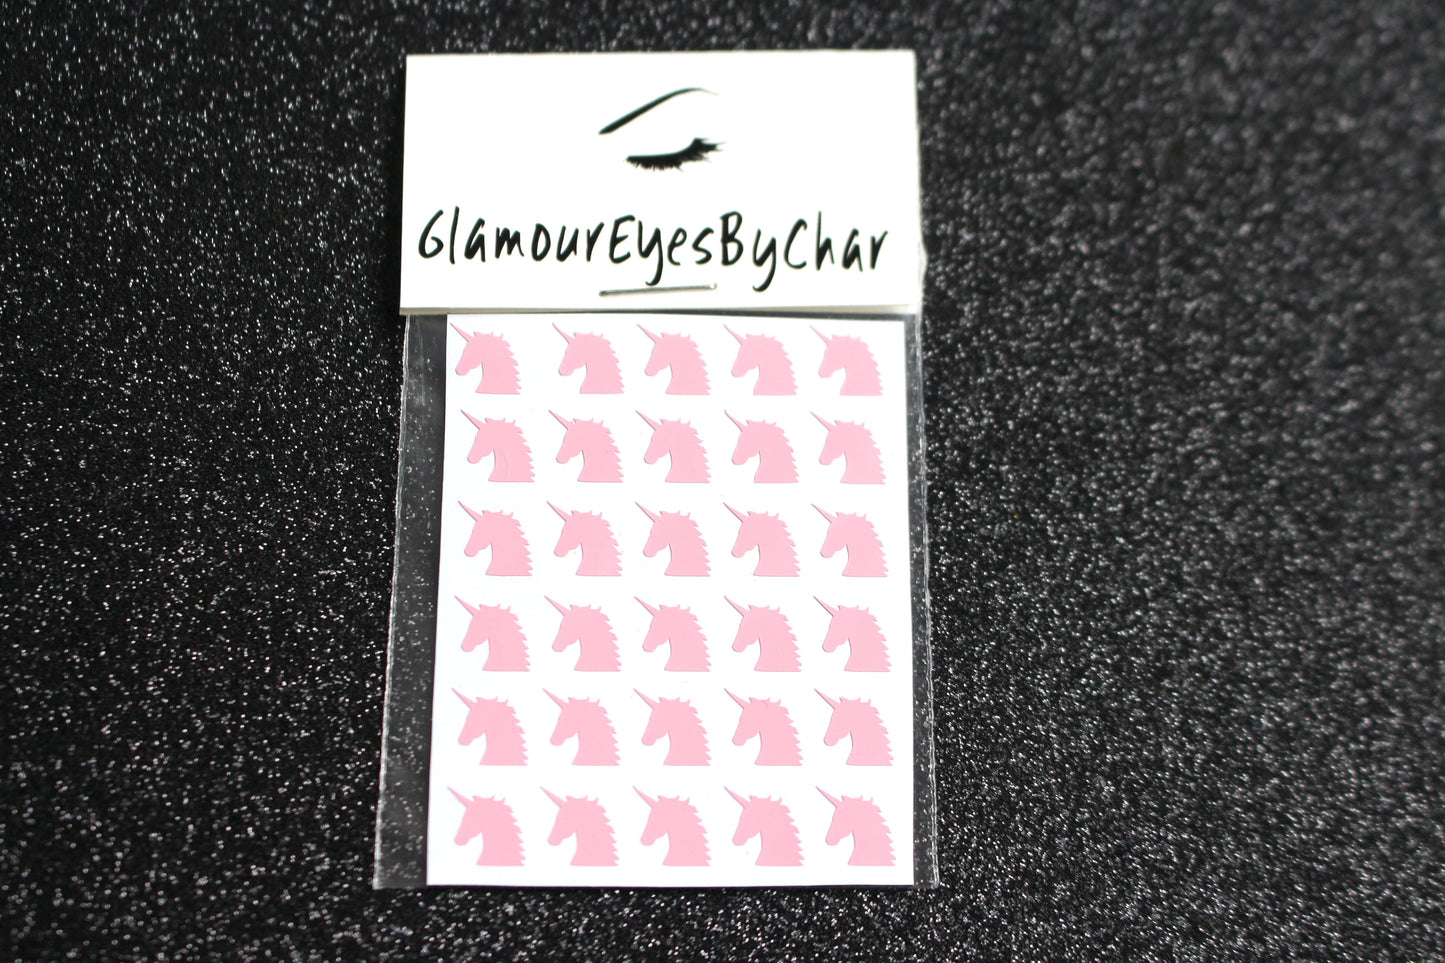 No need to go to the nail salon. Spice up your nails at home with these cute unicorn nail decals. They can be used on natural or acrylic nails. You can also apply them on top of regular or gel/shellac nail polish. These handmade decals can also be used for body art or any DIY project. Each pack contains 30 decals and is available in 5 different colours.  Tip: Apply some of our glitter on your nails to really GLAMOUREYES your look.